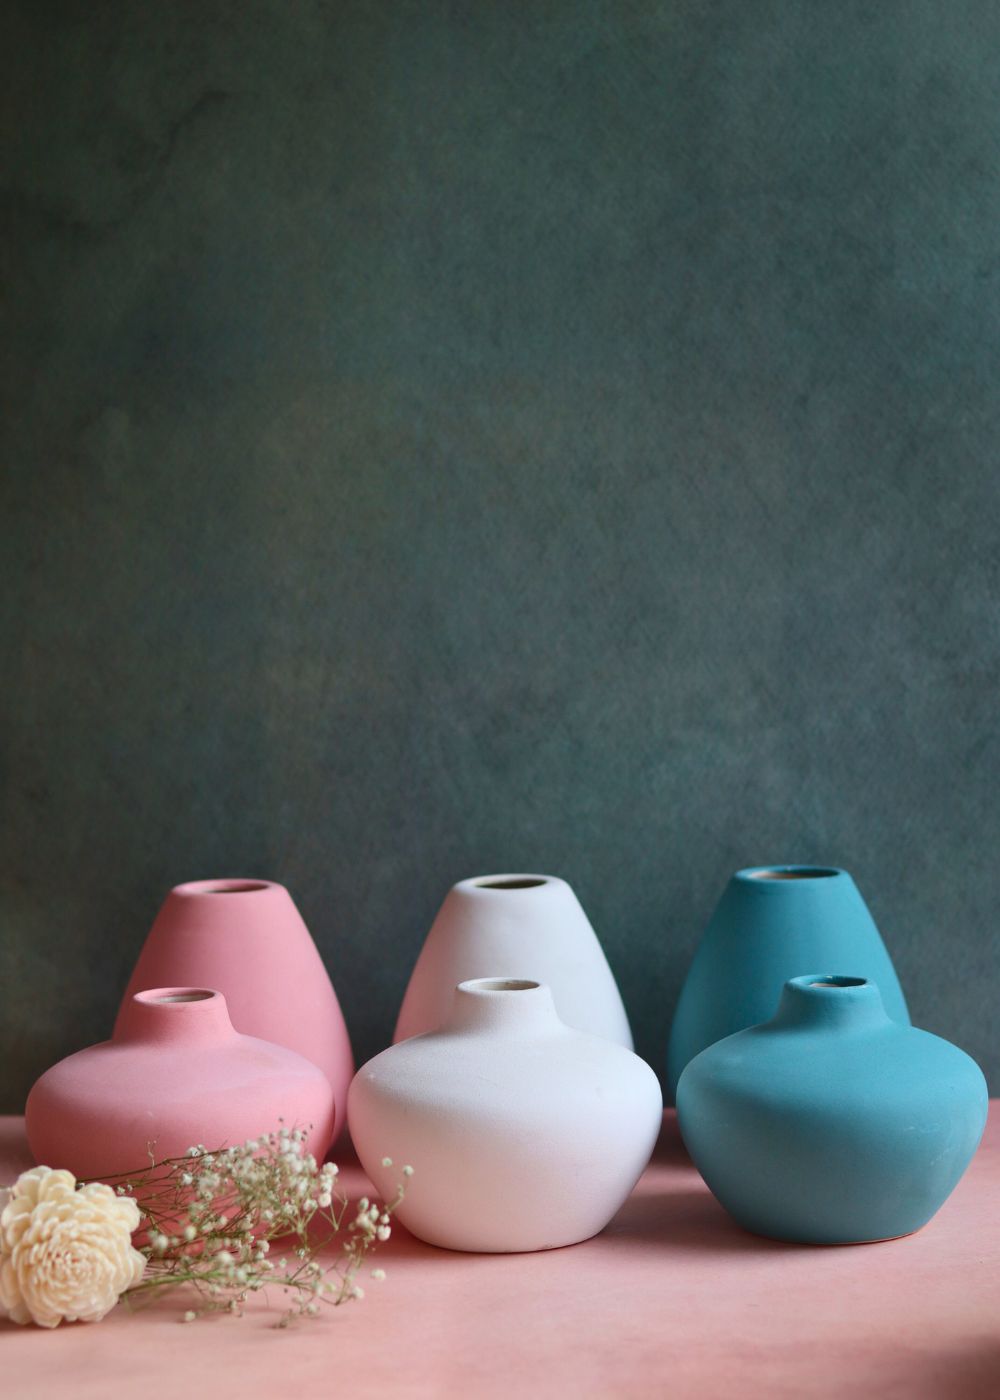 esoteric vases set of 6 for the price of 5